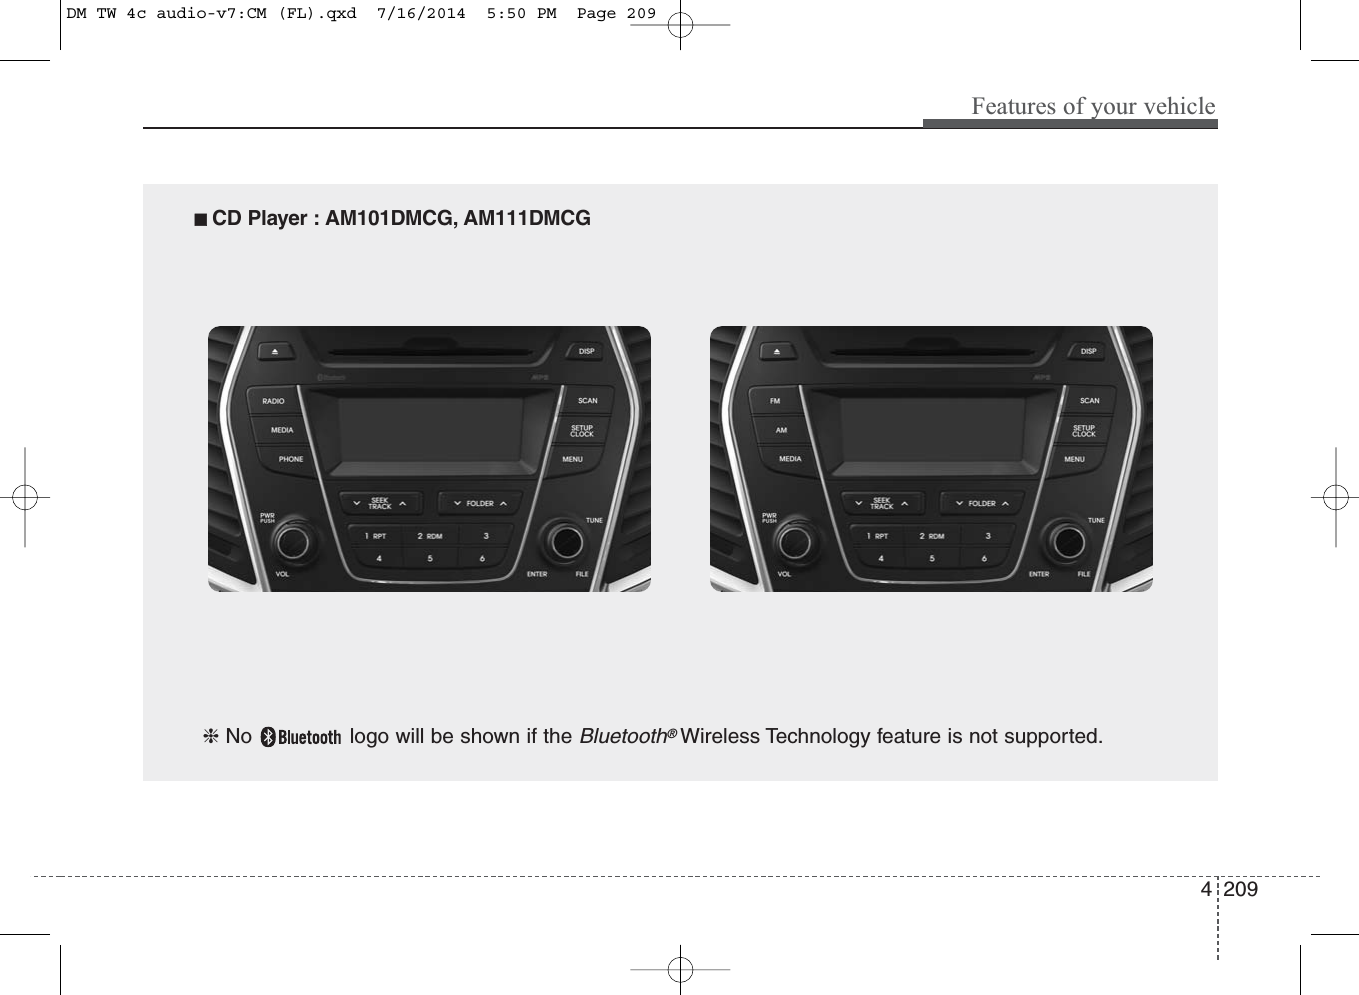 4 209Features of your vehicle■ CD Player : AM101DMCG, AM111DMCG❈ No  logo will be shown if the Bluetooth®Wireless Technology feature is not supported.DM TW 4c audio-v7:CM (FL).qxd  7/16/2014  5:50 PM  Page 209